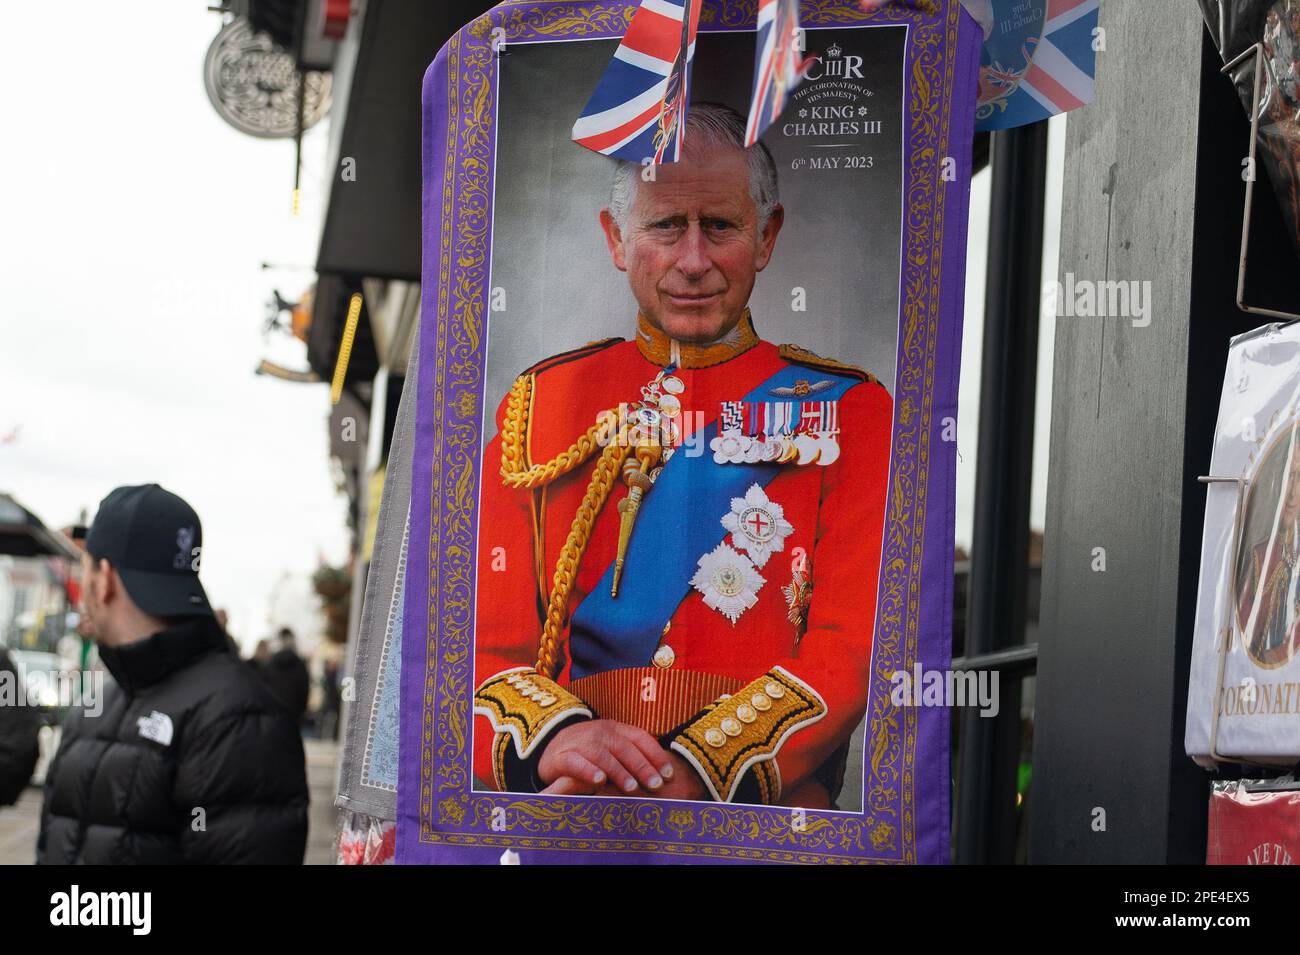 Windsor, Berkshire, UK. 15th March, 2023. The town of Windsor is gearing up for the Coronation of King Charles III. A concert is to be held in the grounds of Windsor Castle on Sunday 7th May 2023. Tourist shops are starting to sell King Charles III Cornonation memorabilia. Credit: Maureen McLean/Alamy Live News Stock Photo